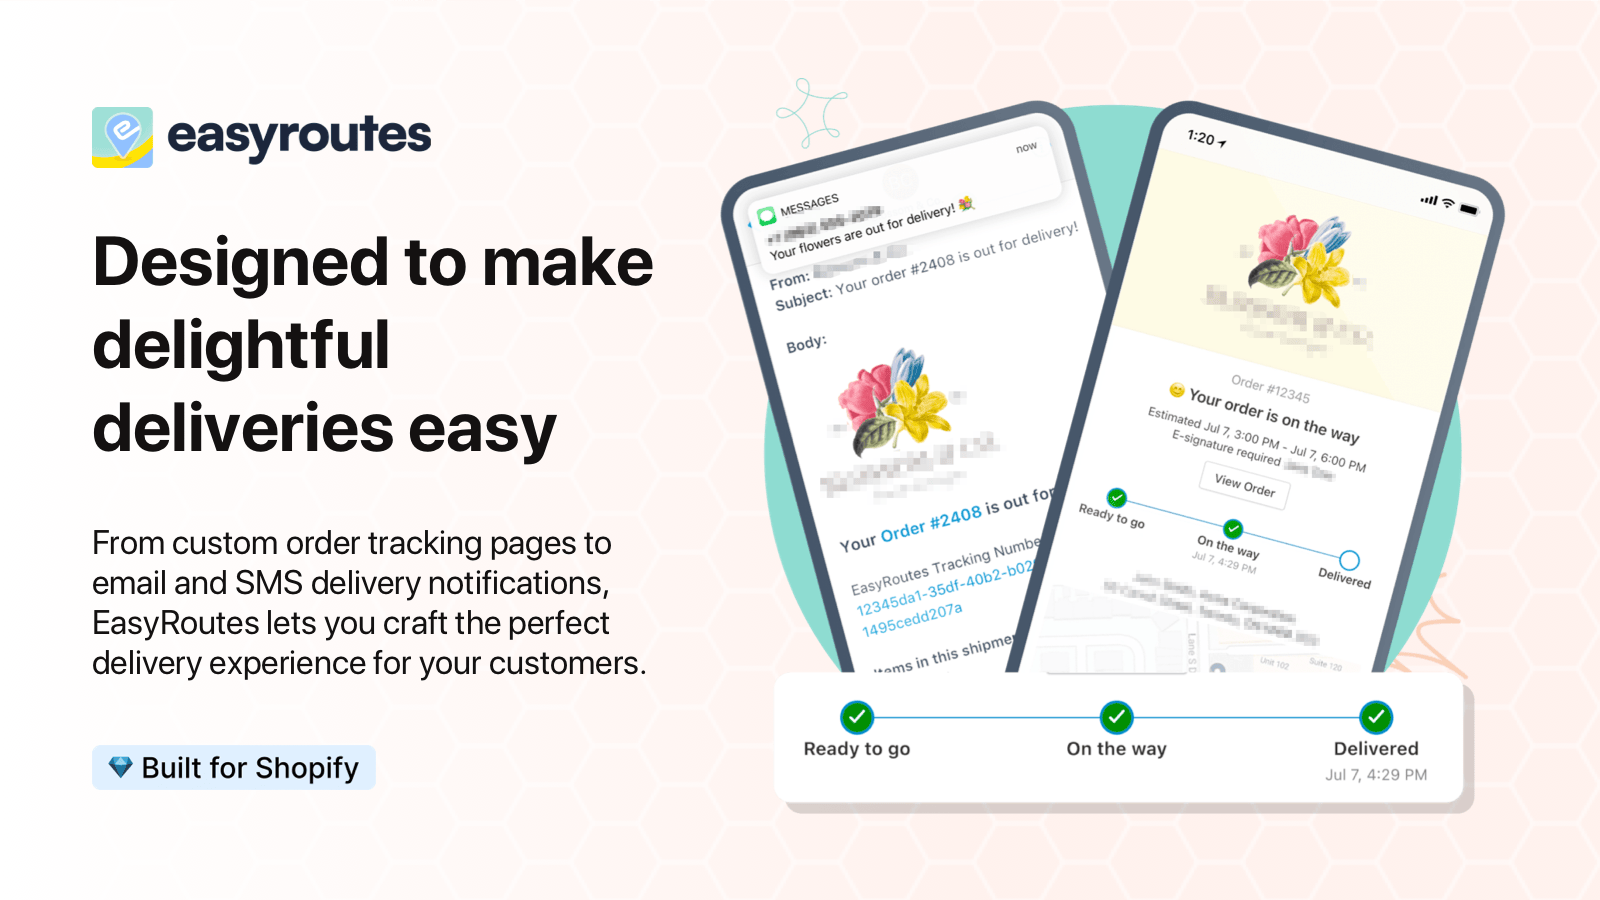 EasyRoutes has order tracking pages, SMS & Email notifications